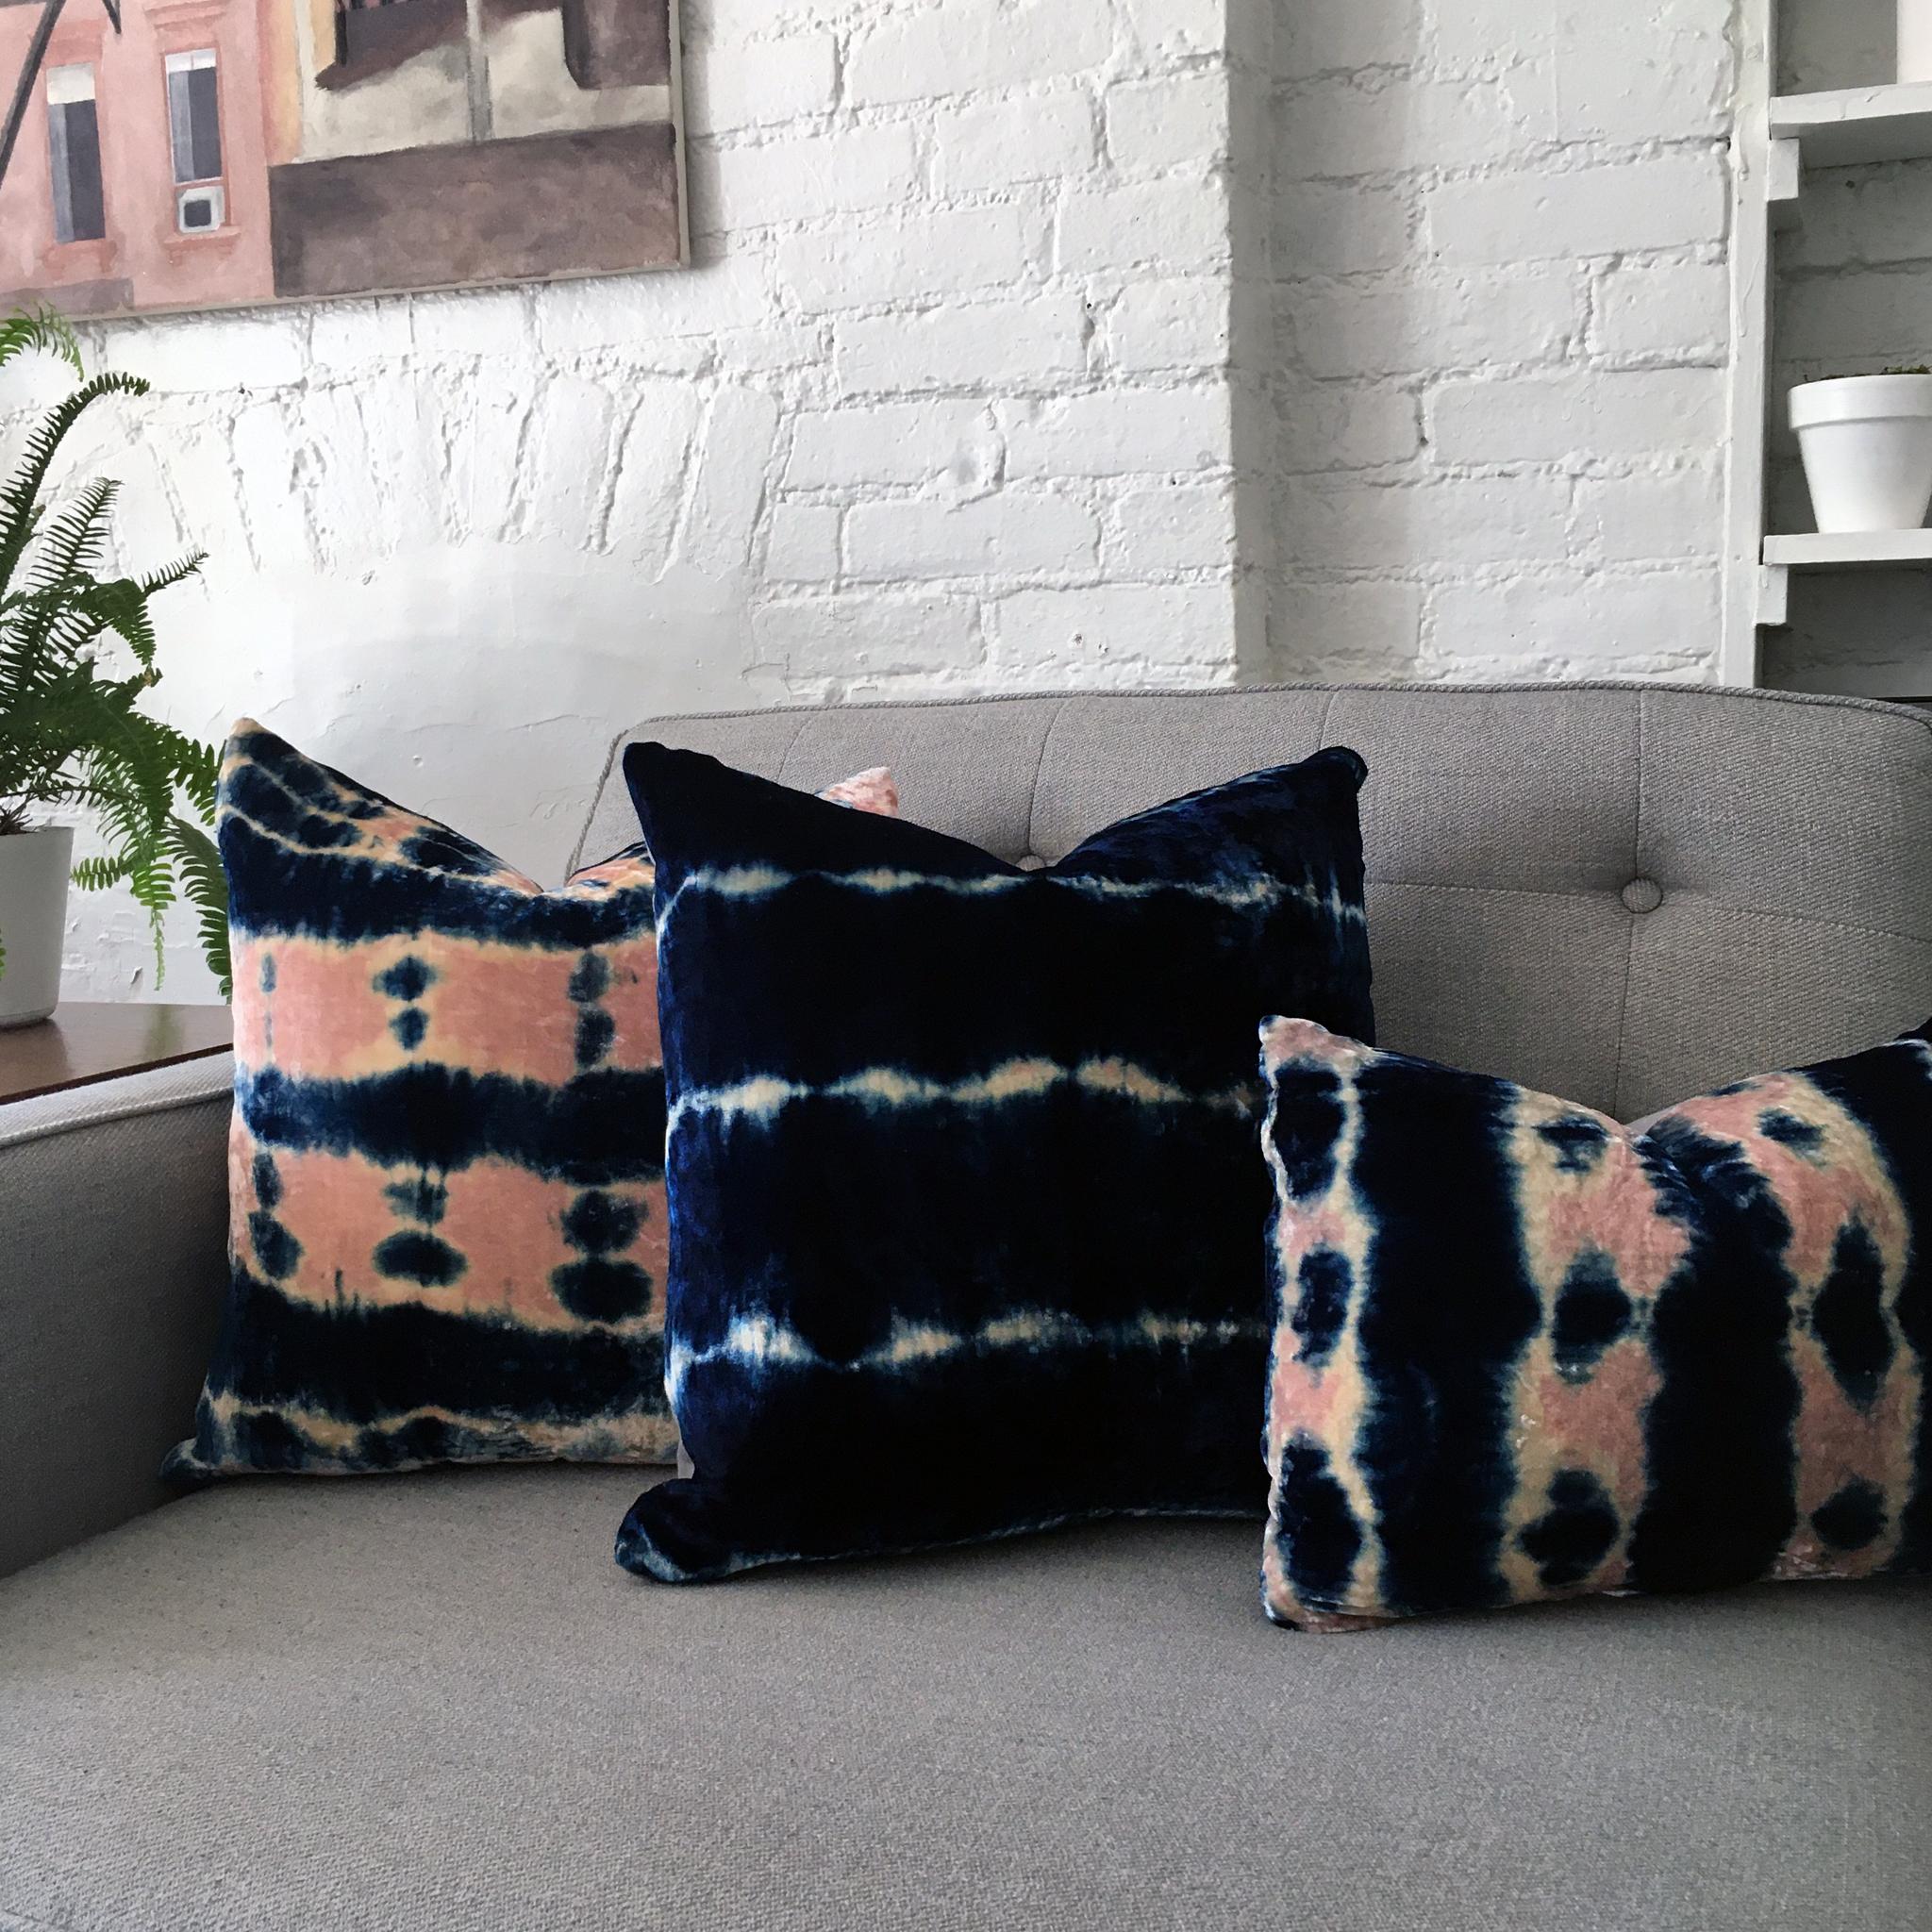 Rose velvet pillow dyed with indigo in Striped pattern with gray linen backing. Hand-dyed and sewn in New York City, down pillow insert made locally in NYC. Pillow measures 18 x 18 inches. Each velvet pillow is hand made and one of a kind.

Custom